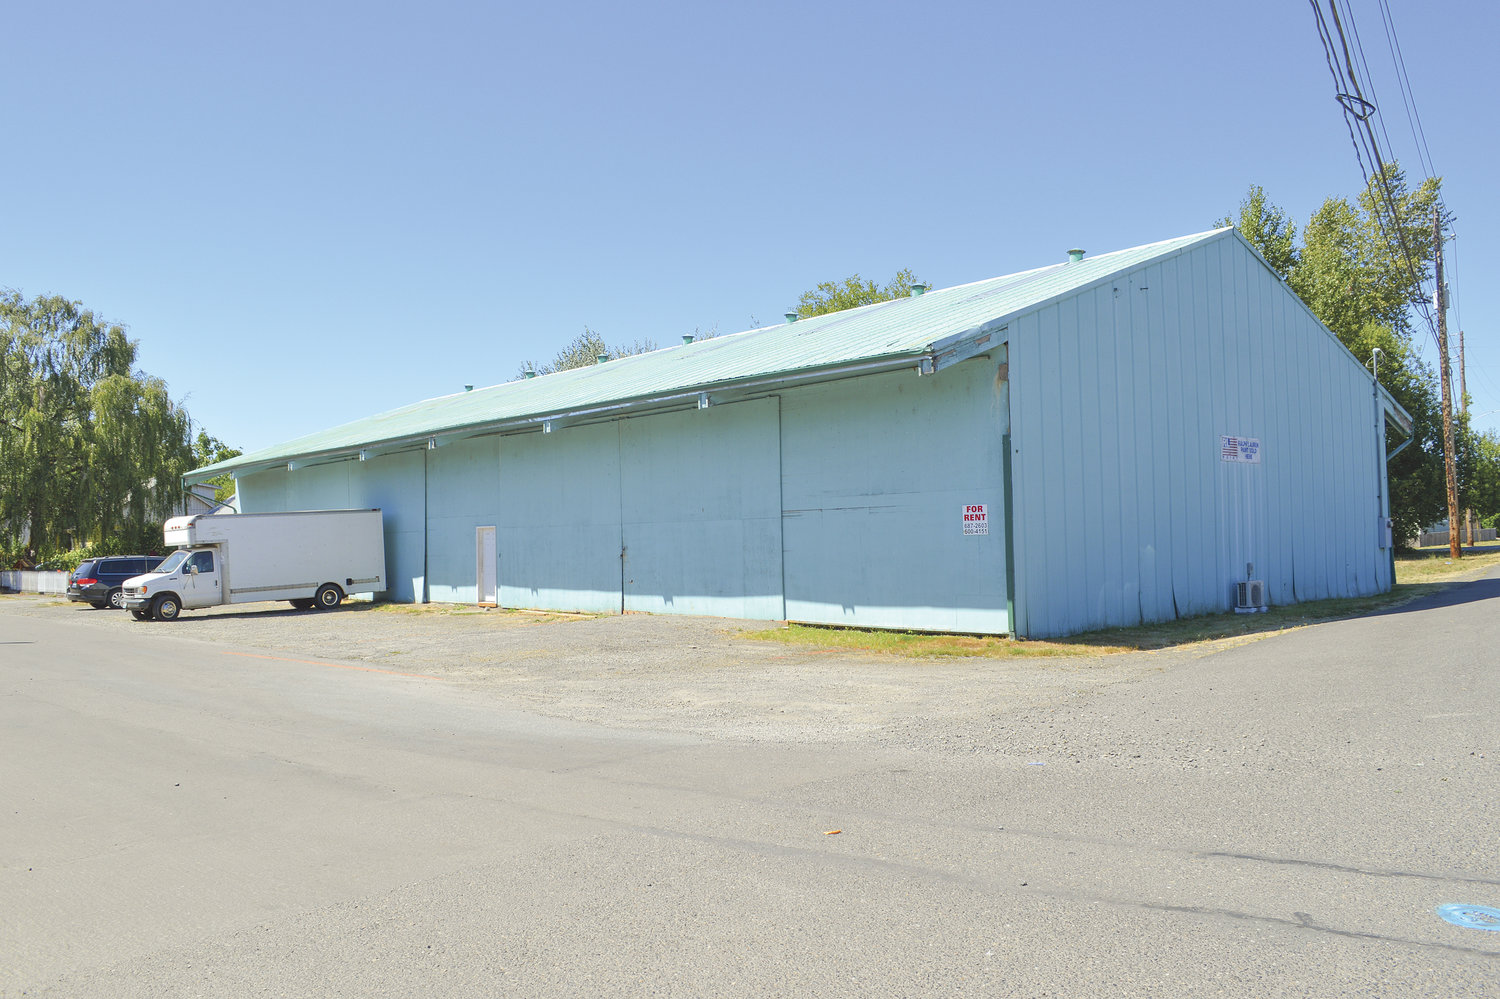 OUTSIDE THIS STORAGE facility was where 36-year-old Brandon Maulding, of Battle Ground, was found unconscious and breathing the night of Aug. 1, after allegedly being beaten with a baseball bat. Maulding later died of his injuries at PeaceHealth Southwest Medical Center.